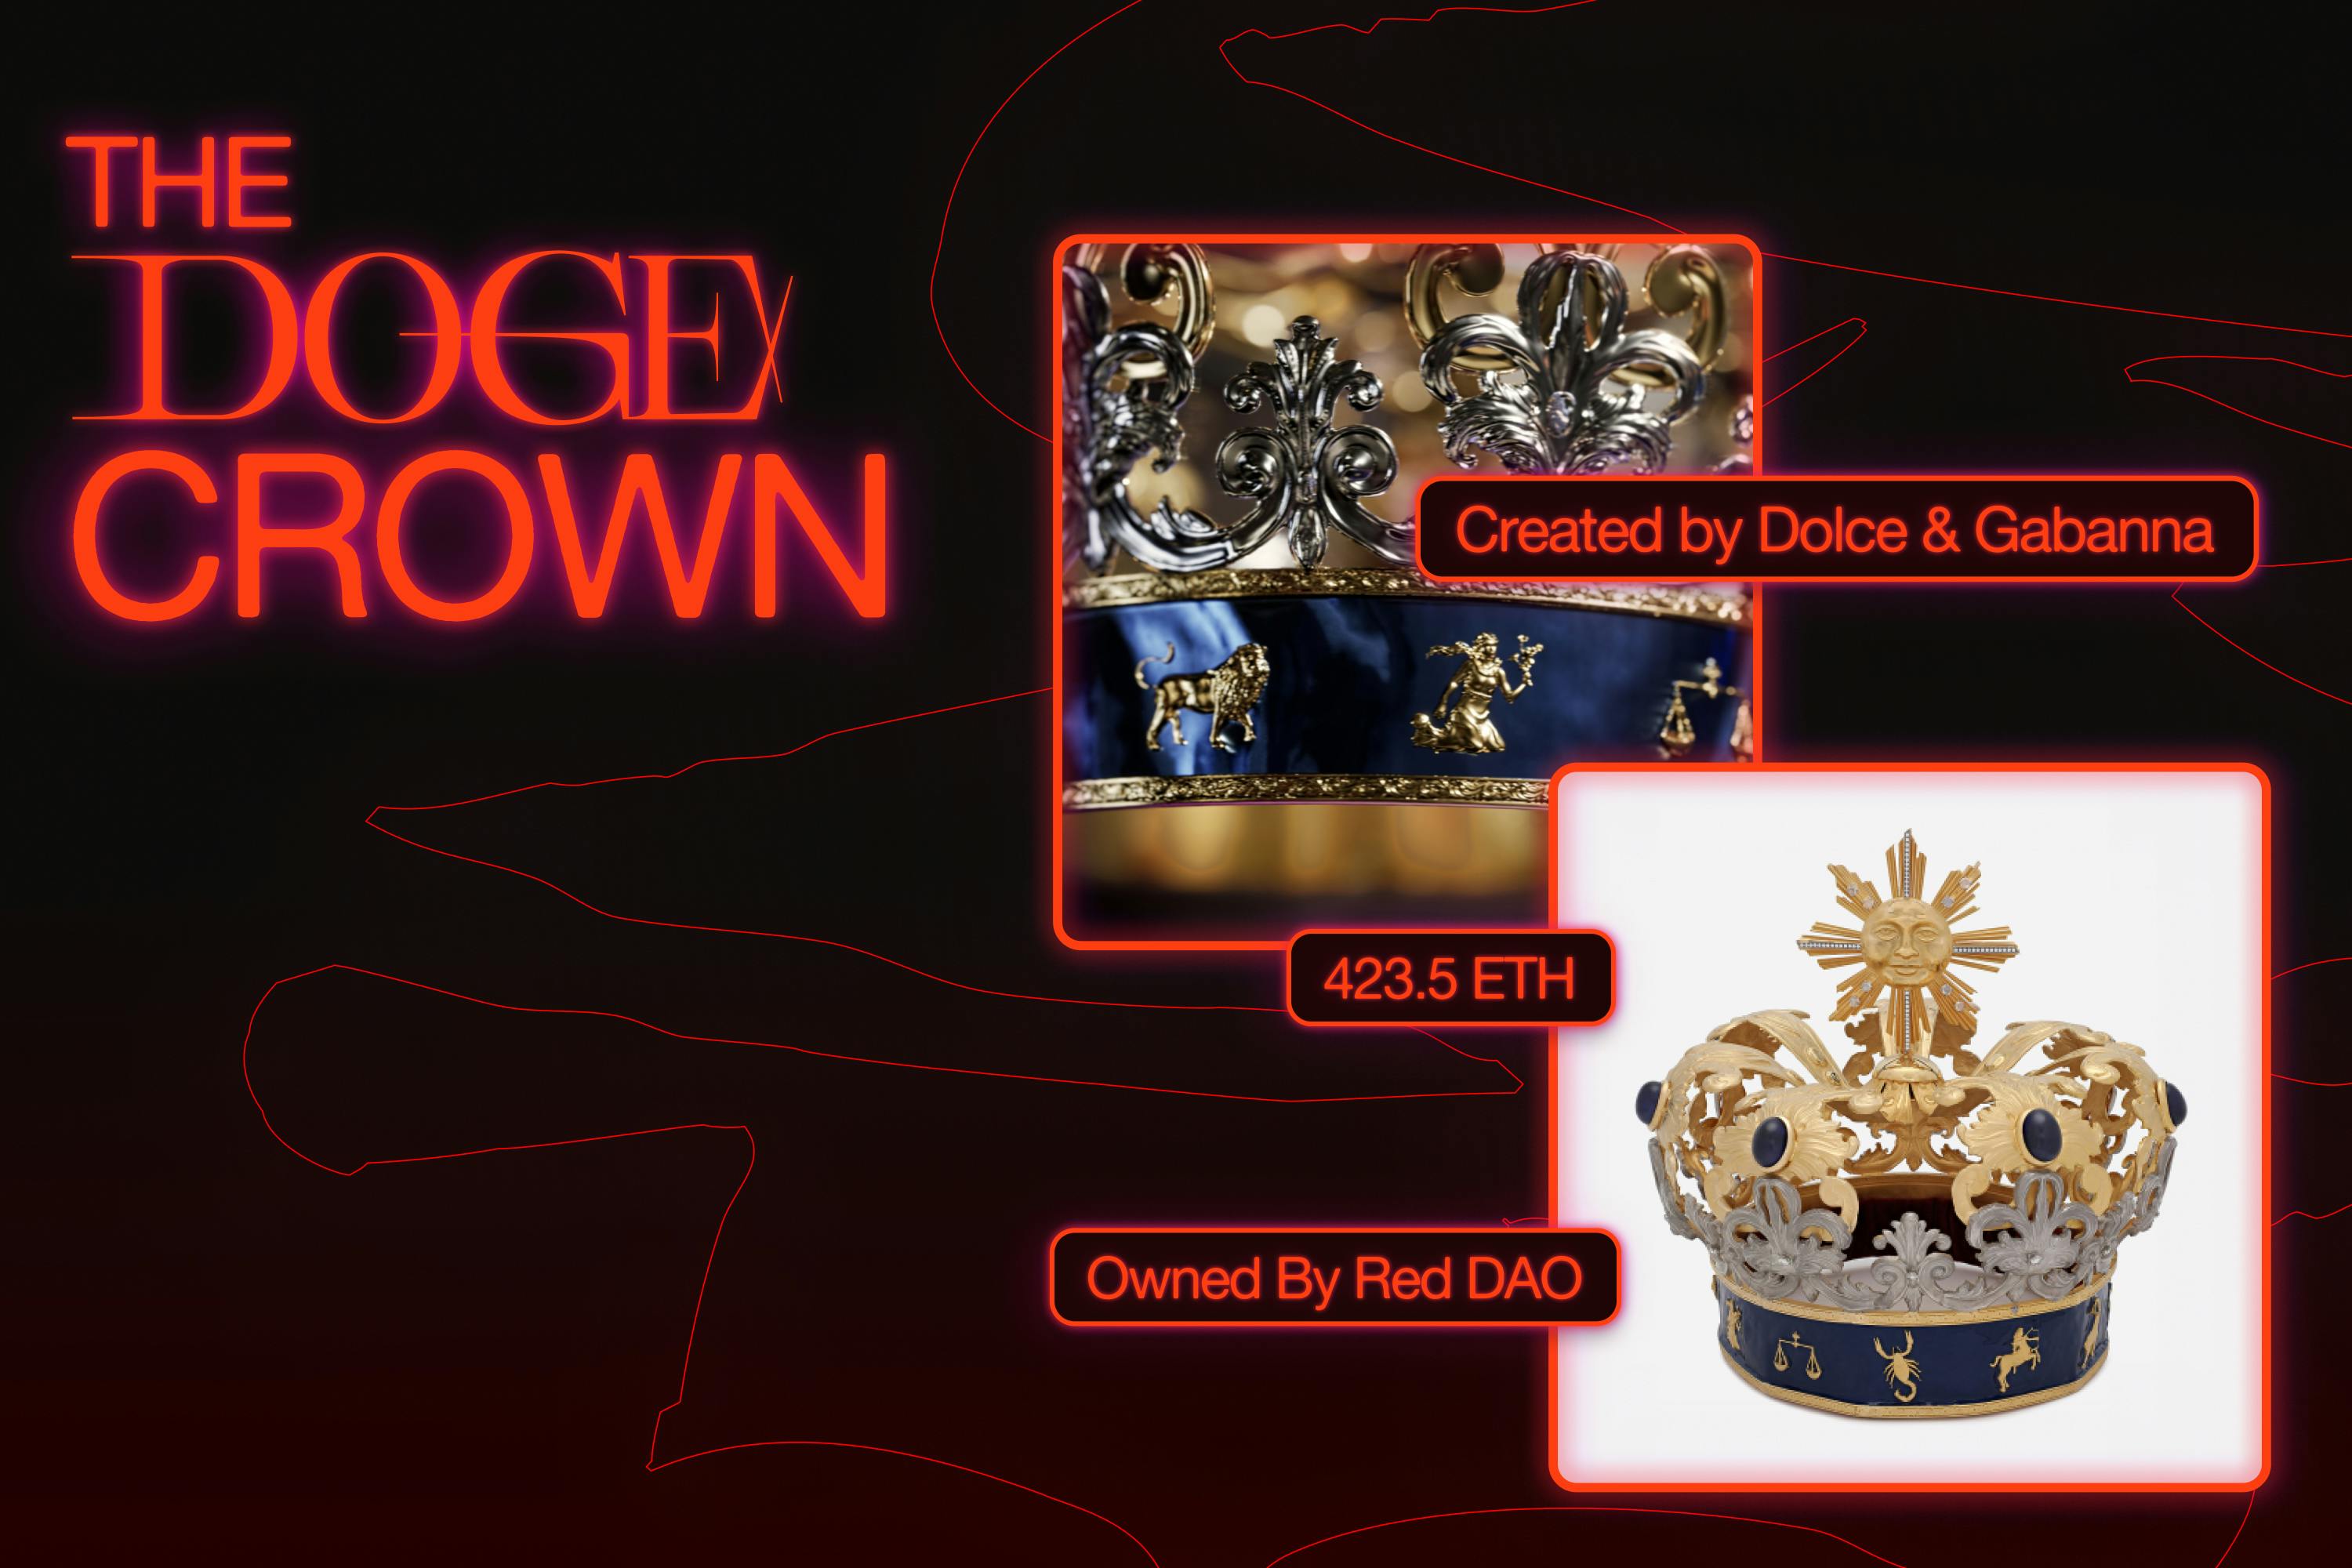 The Doge Crown by Dolce & Gabbana in Red's collection